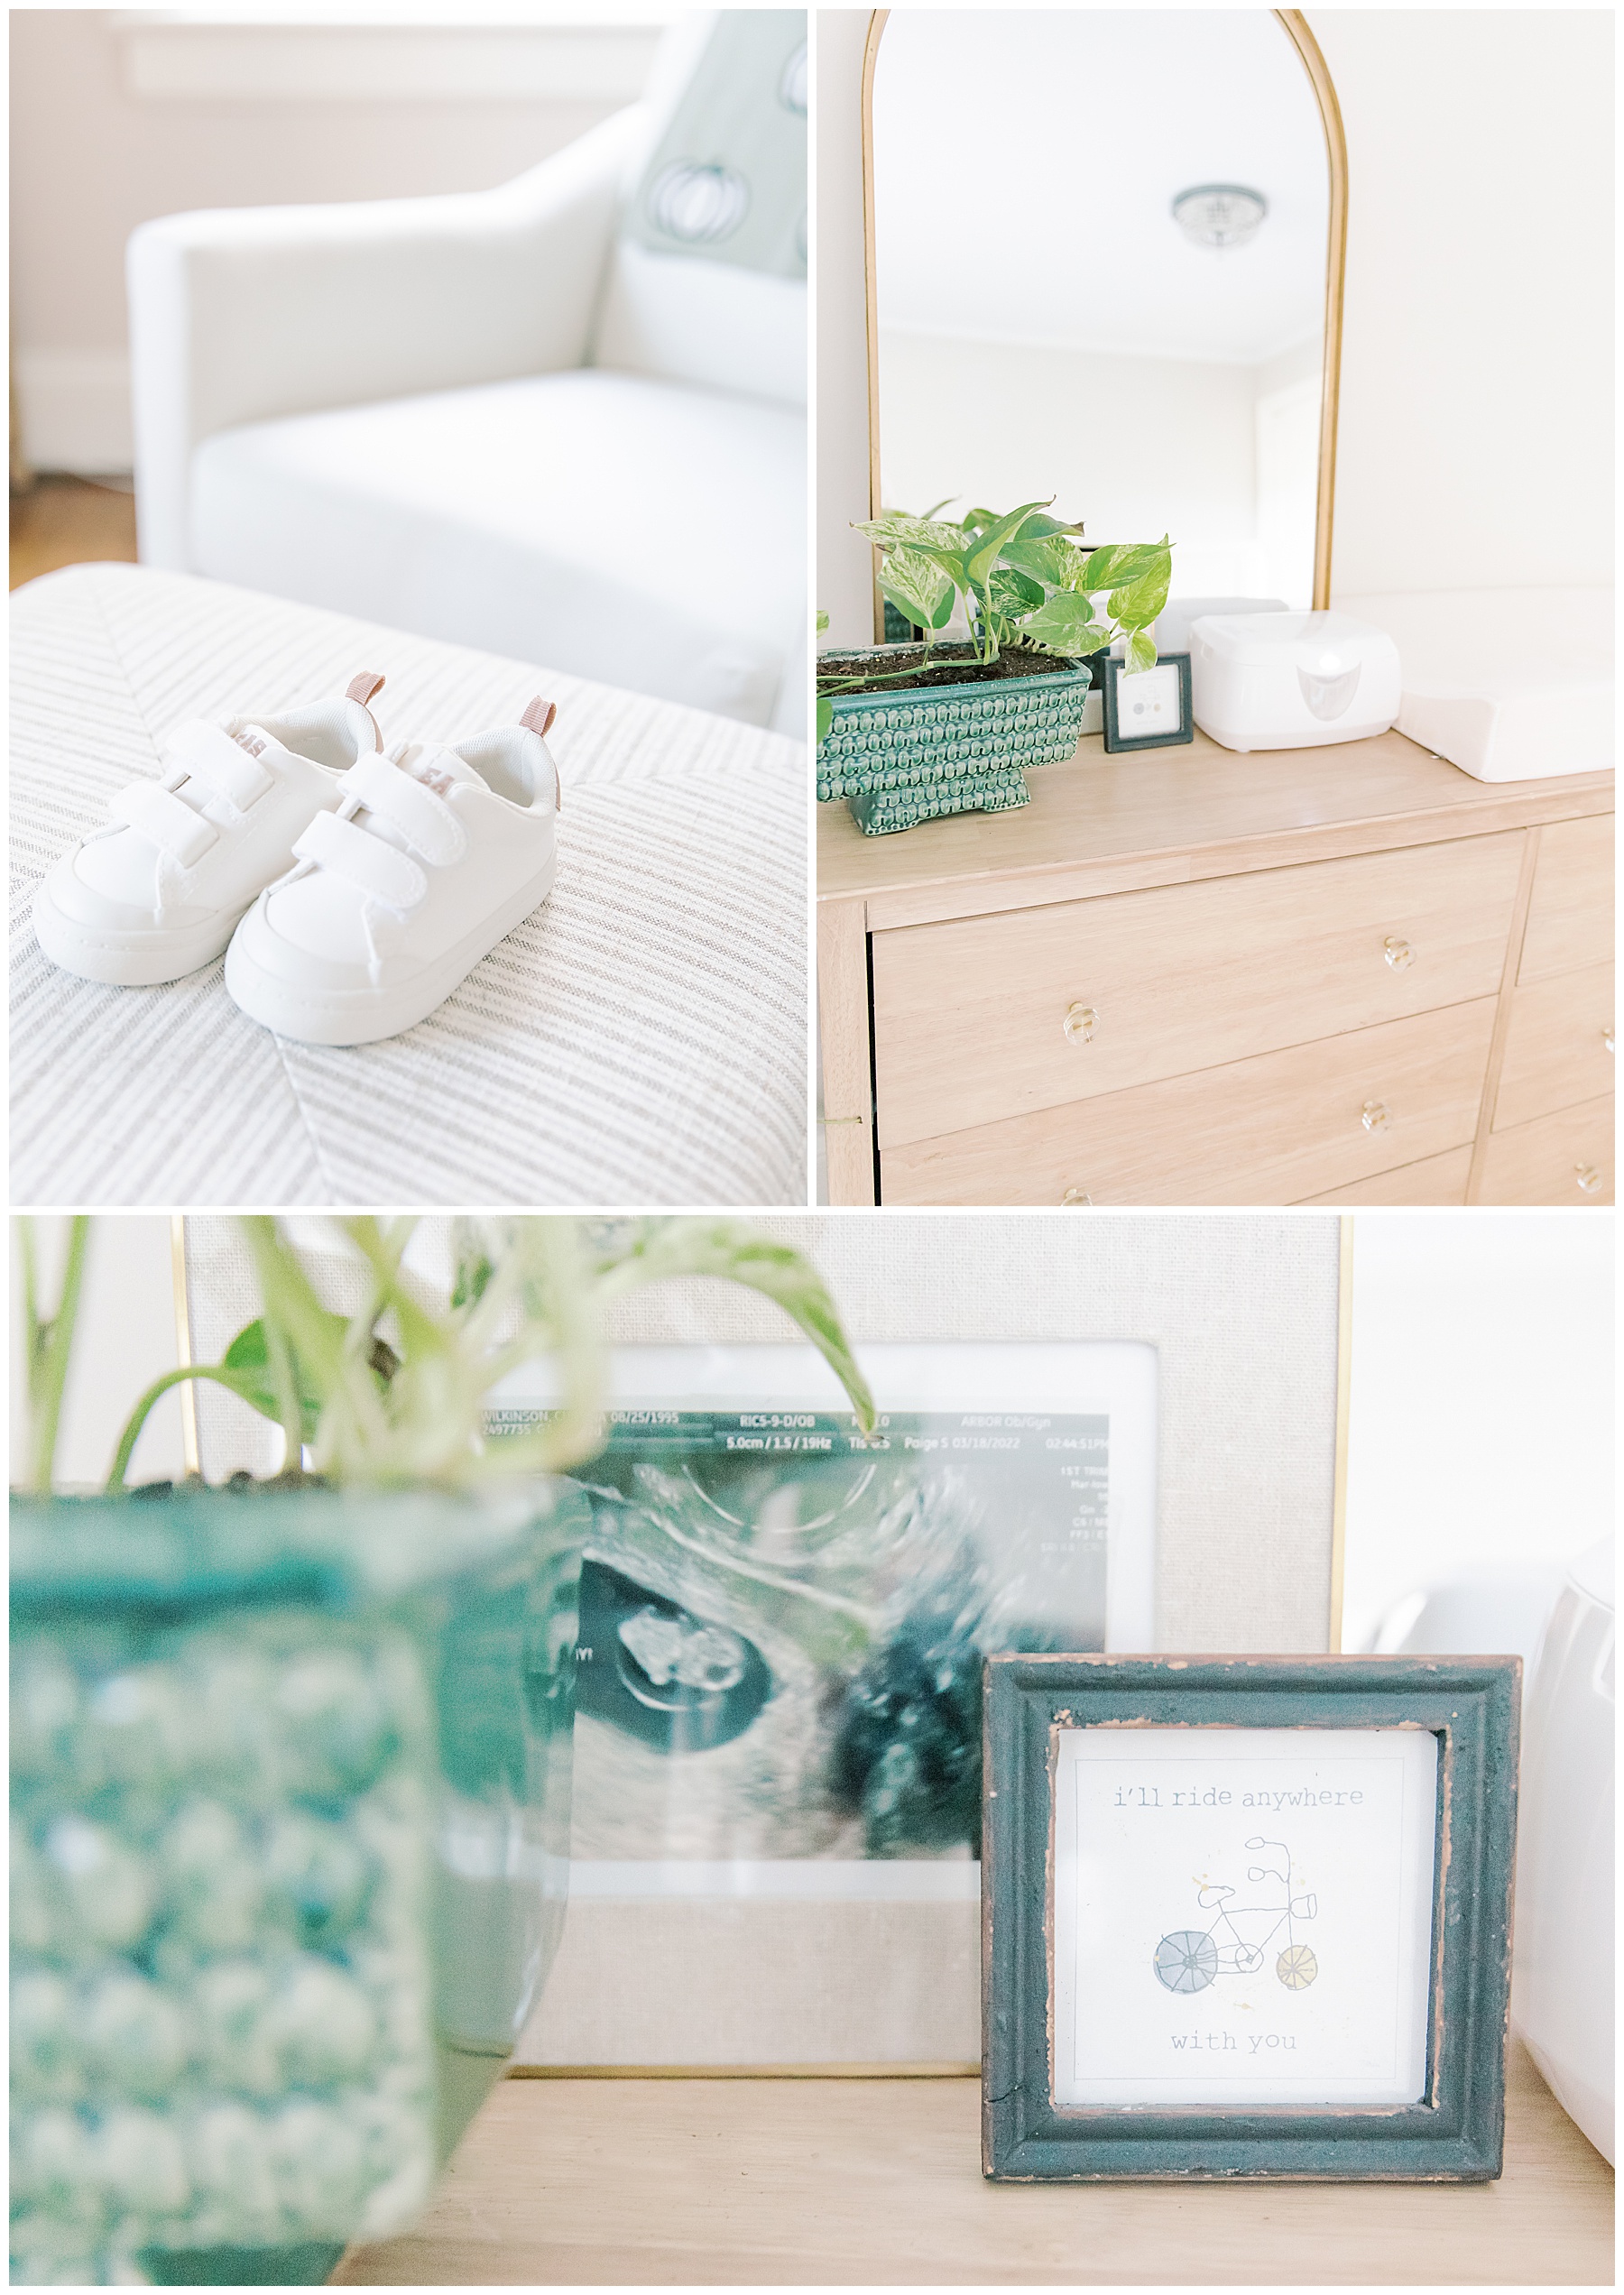 South Park Newborn Photographer | Baby boy shoes in nursery rocking chair